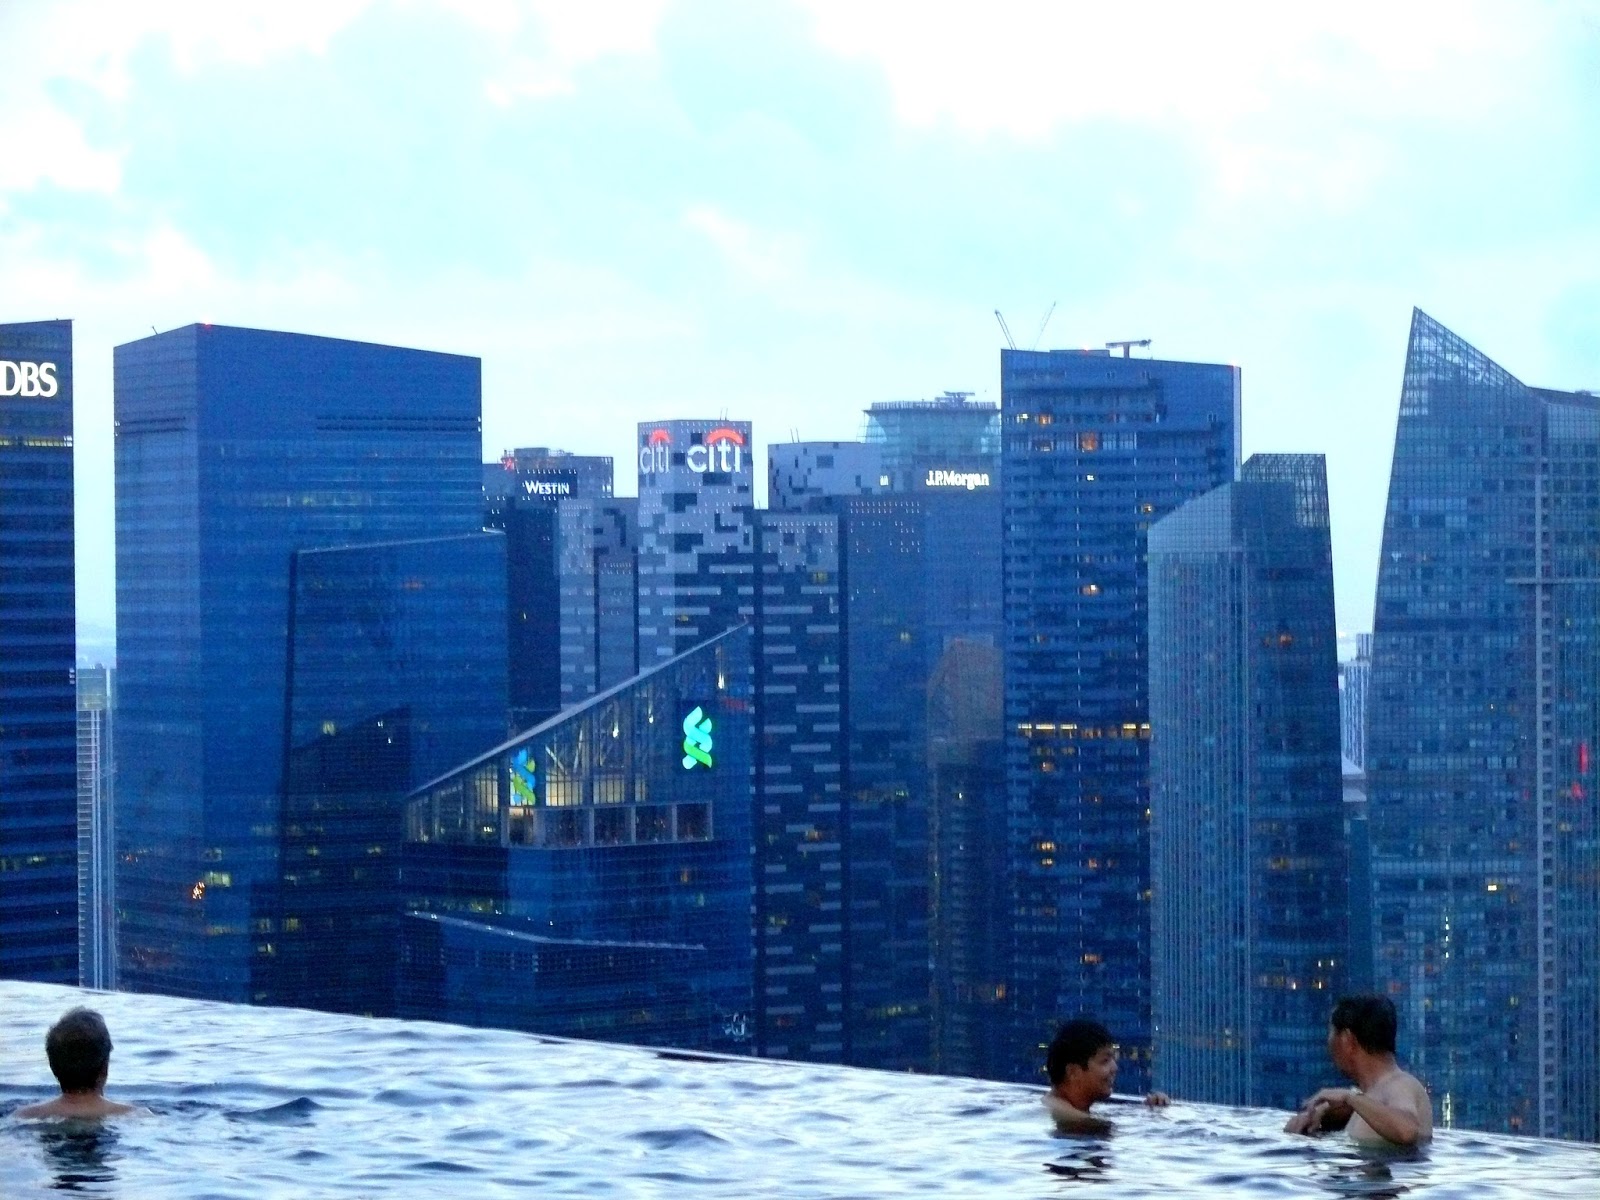 Marina Bay Sands Singapore Hotel with Infinity Pool and SkyPark